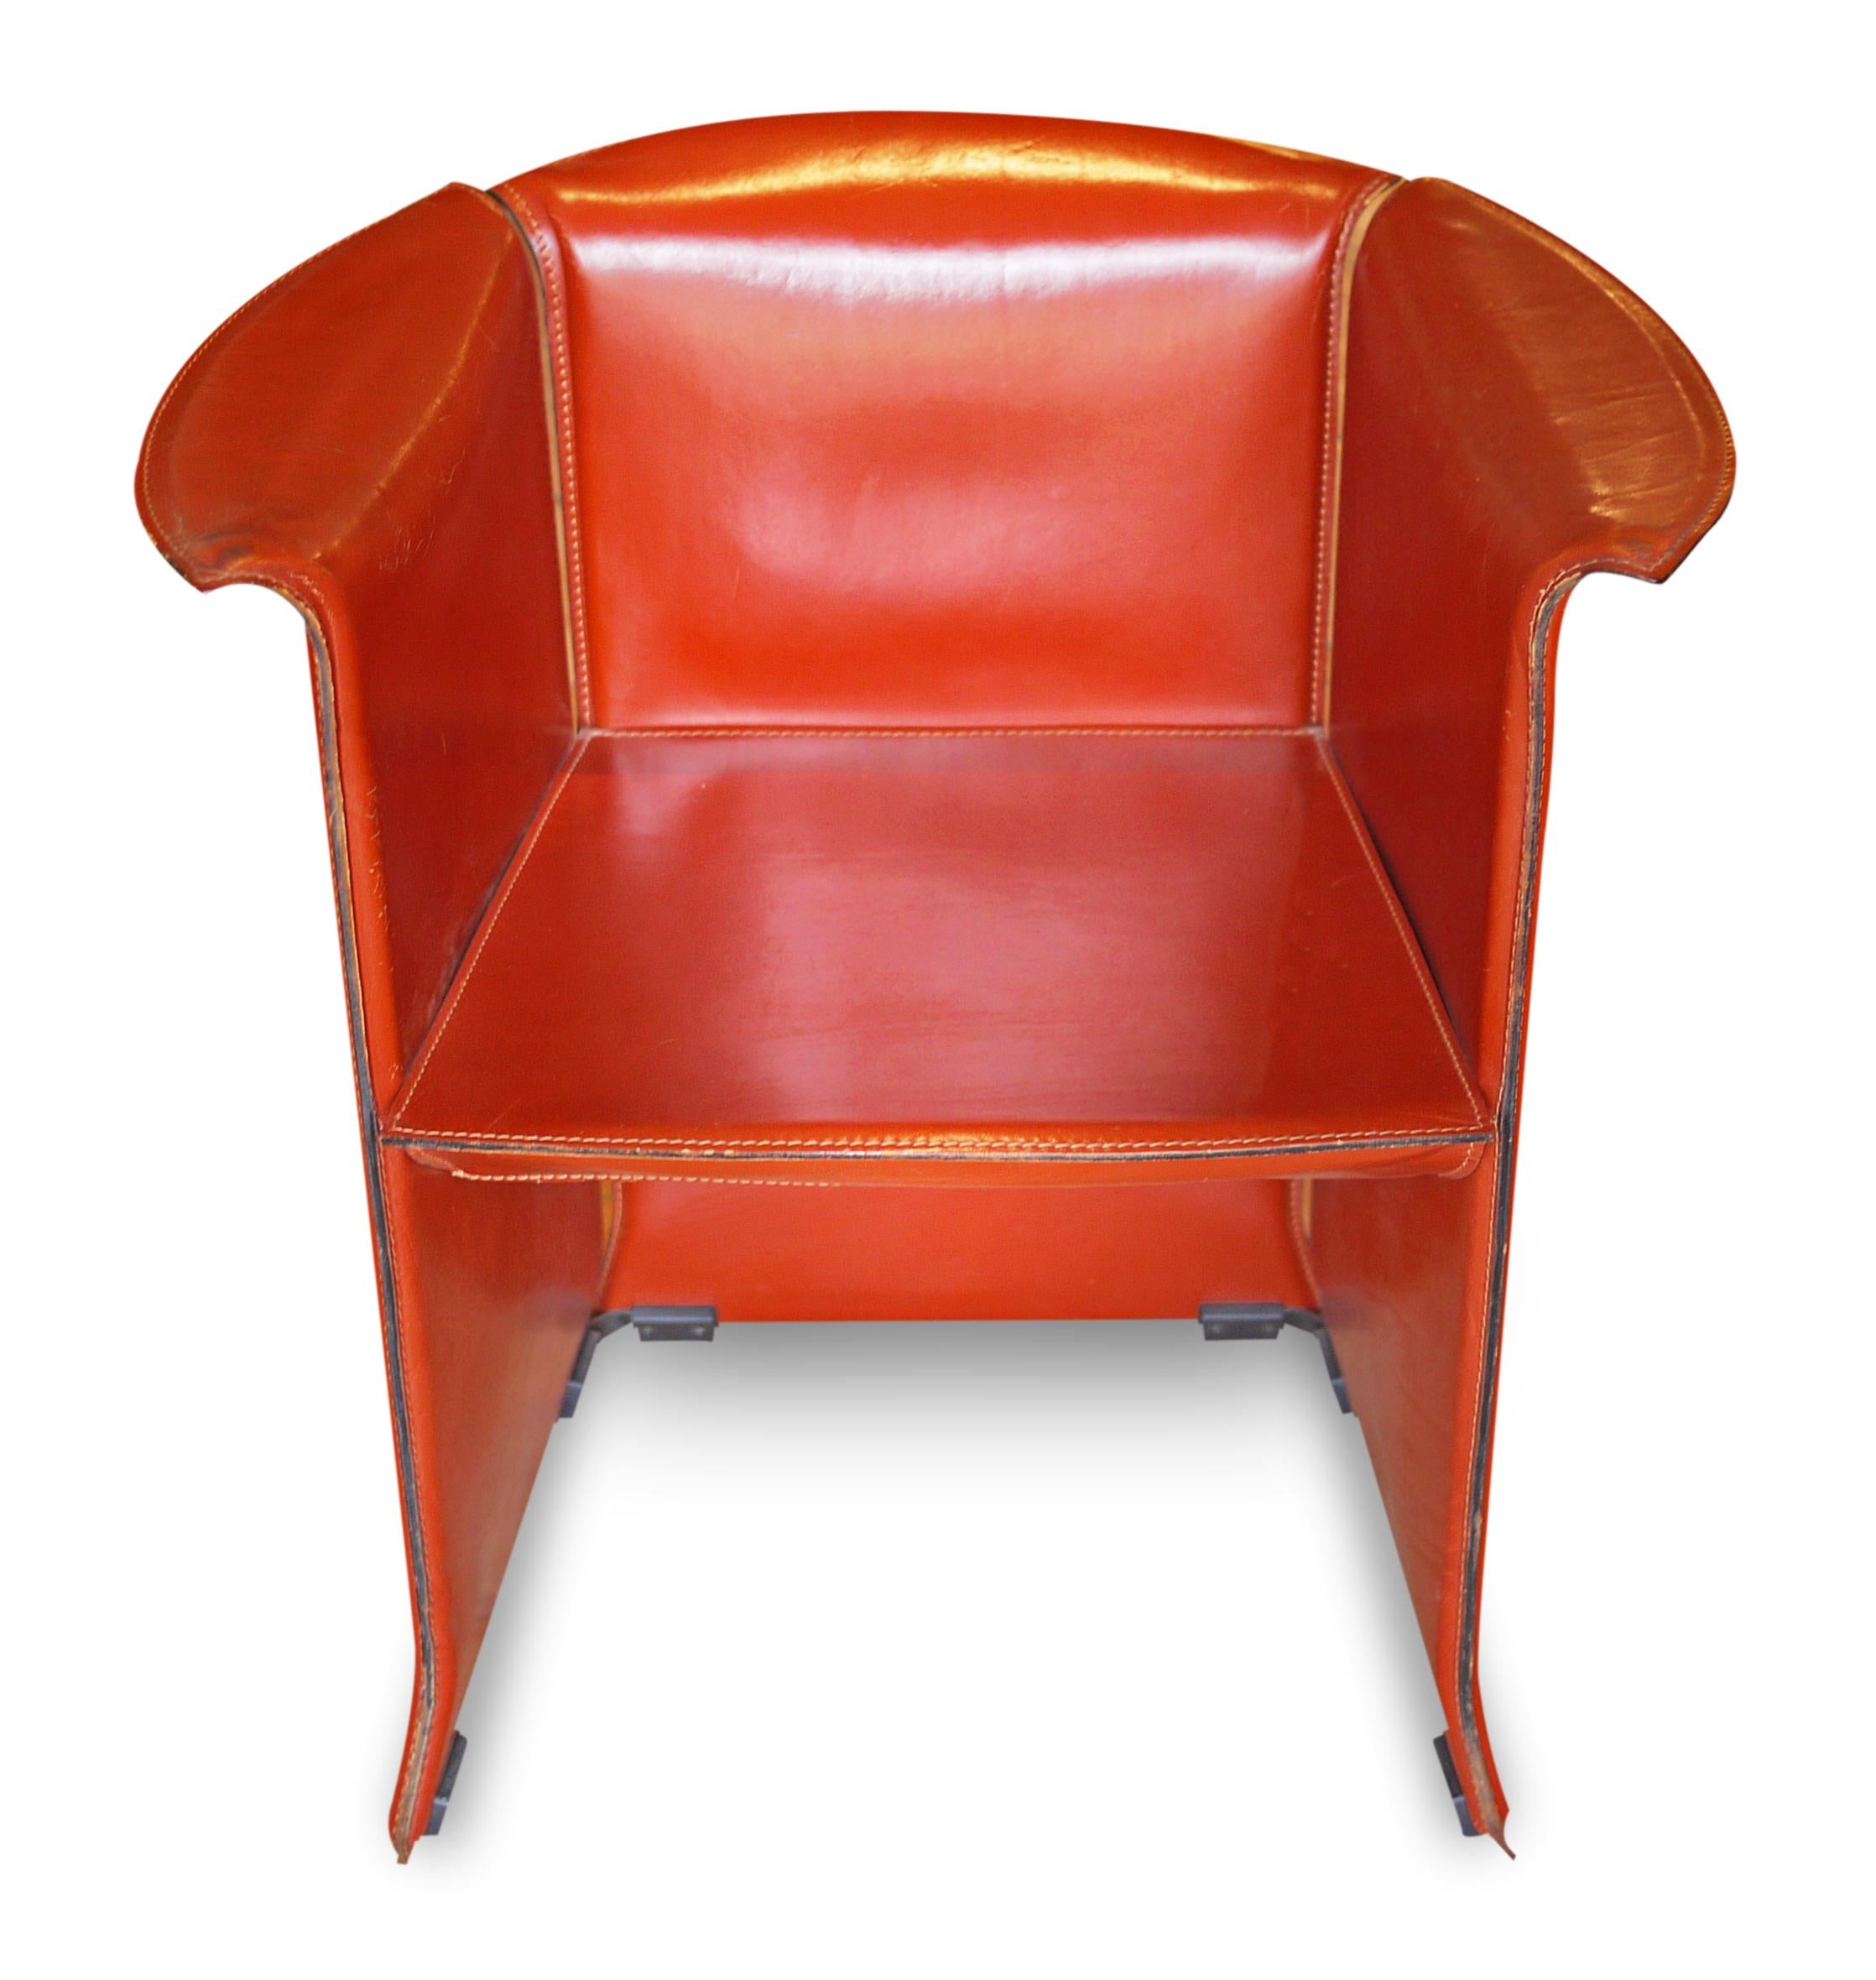 Set of three beautiful armchairs produced by Cassina, in orange leather, designer Mario Bellini. Italy 1980s
Very good condition, slight signs of wear on the leather.